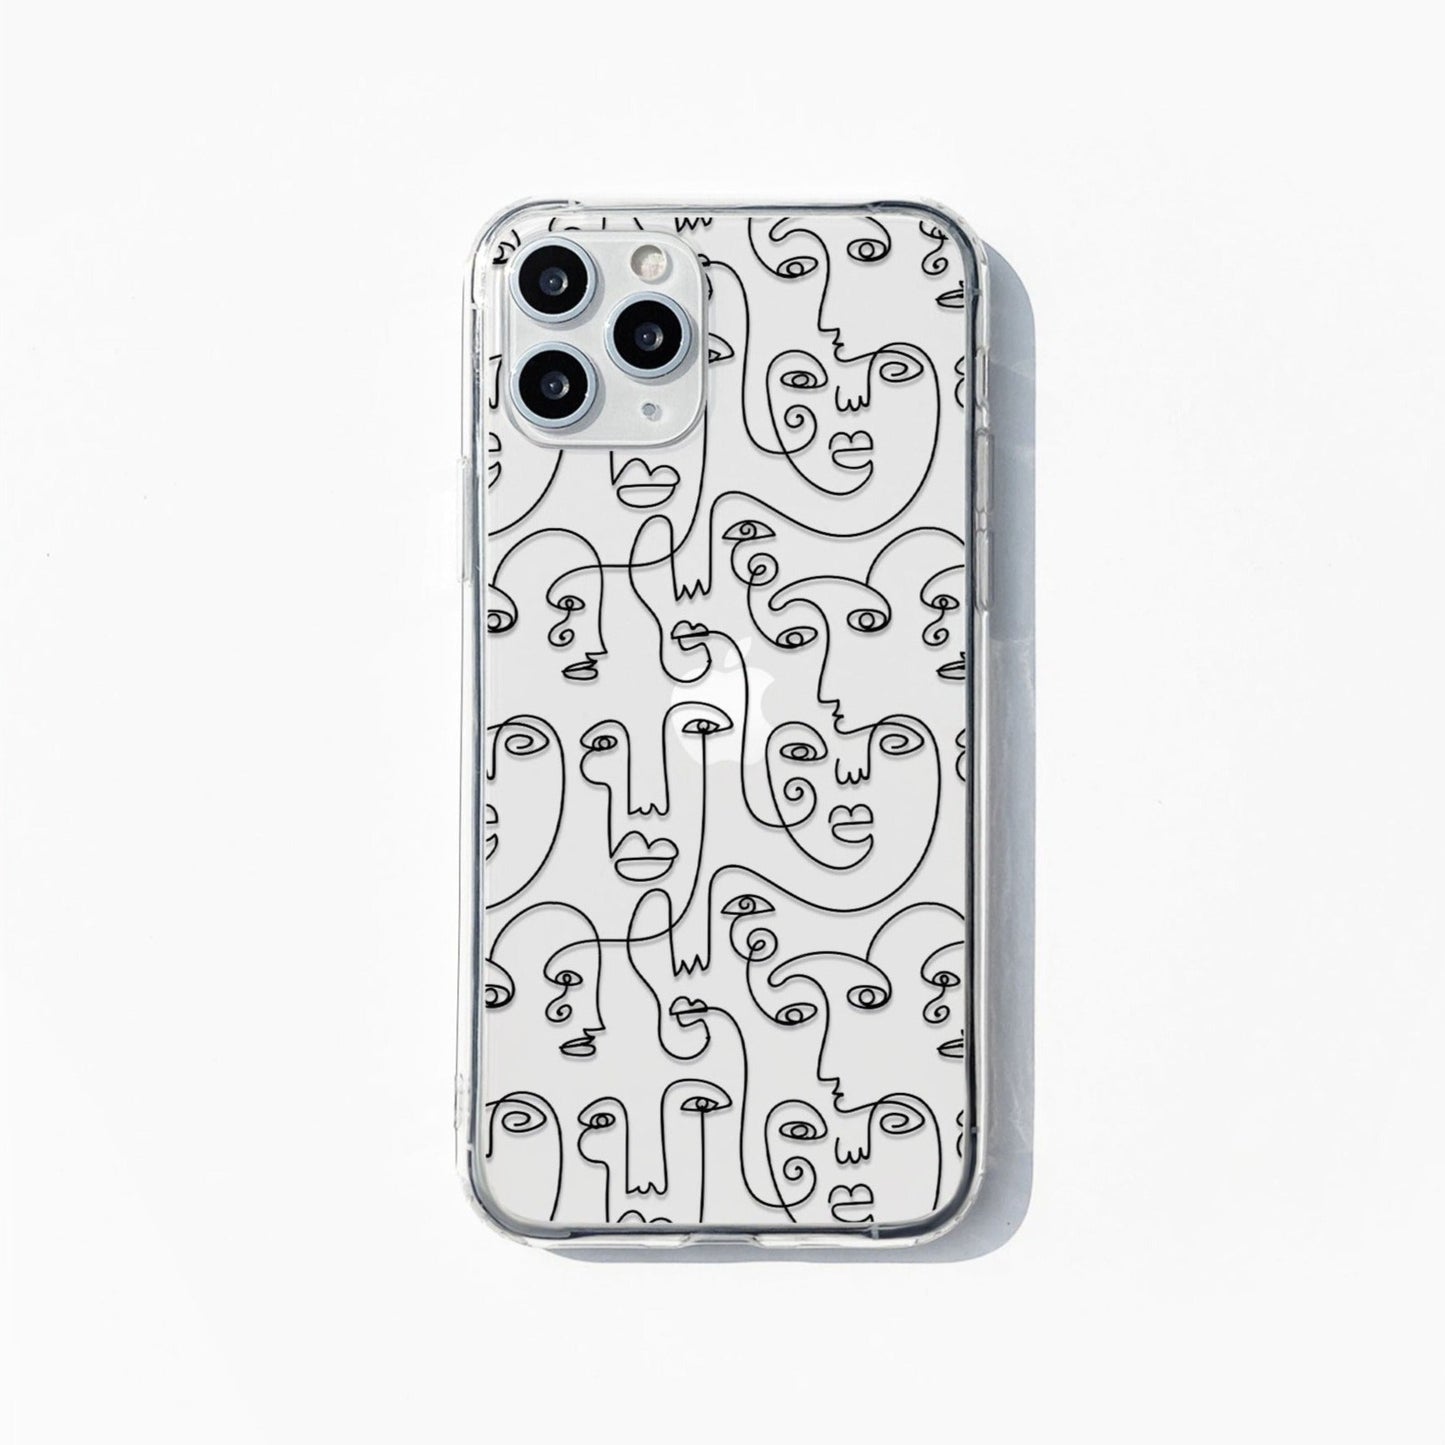 Line art abstract phone case